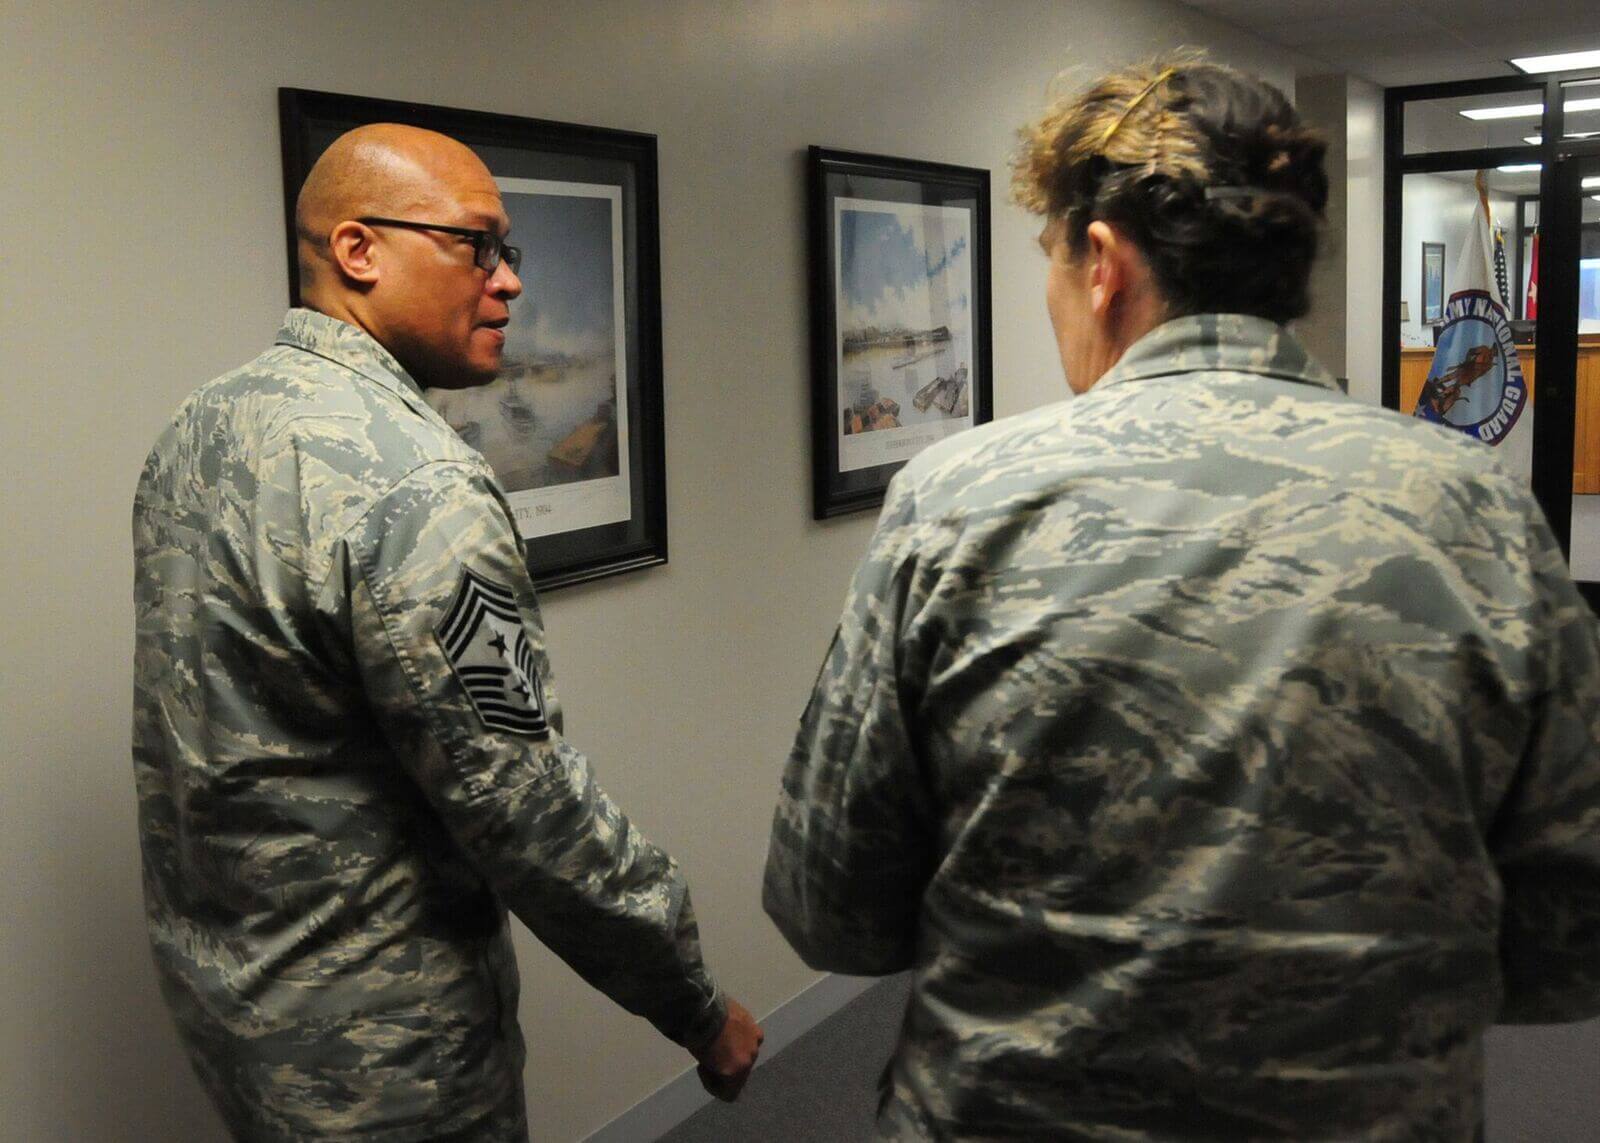 Missouri Air National Guard Command Chief Master Sgt. Joseph E. Hamlett, Ph.D., talks with Senior Master Sgt. Paula J. Runyon, a personnel specialist with the Missouri Air National Guard, at the Ike Skelton National Guard Training Site, in Jefferson City, Mo. Hamlett holds the highest enlisted position in the Missouri Air National Guard and advises the Adjutant General of Missouri on all matters affecting the readiness, training and professional development of all enlisted members of the Missouri Air National Guard.